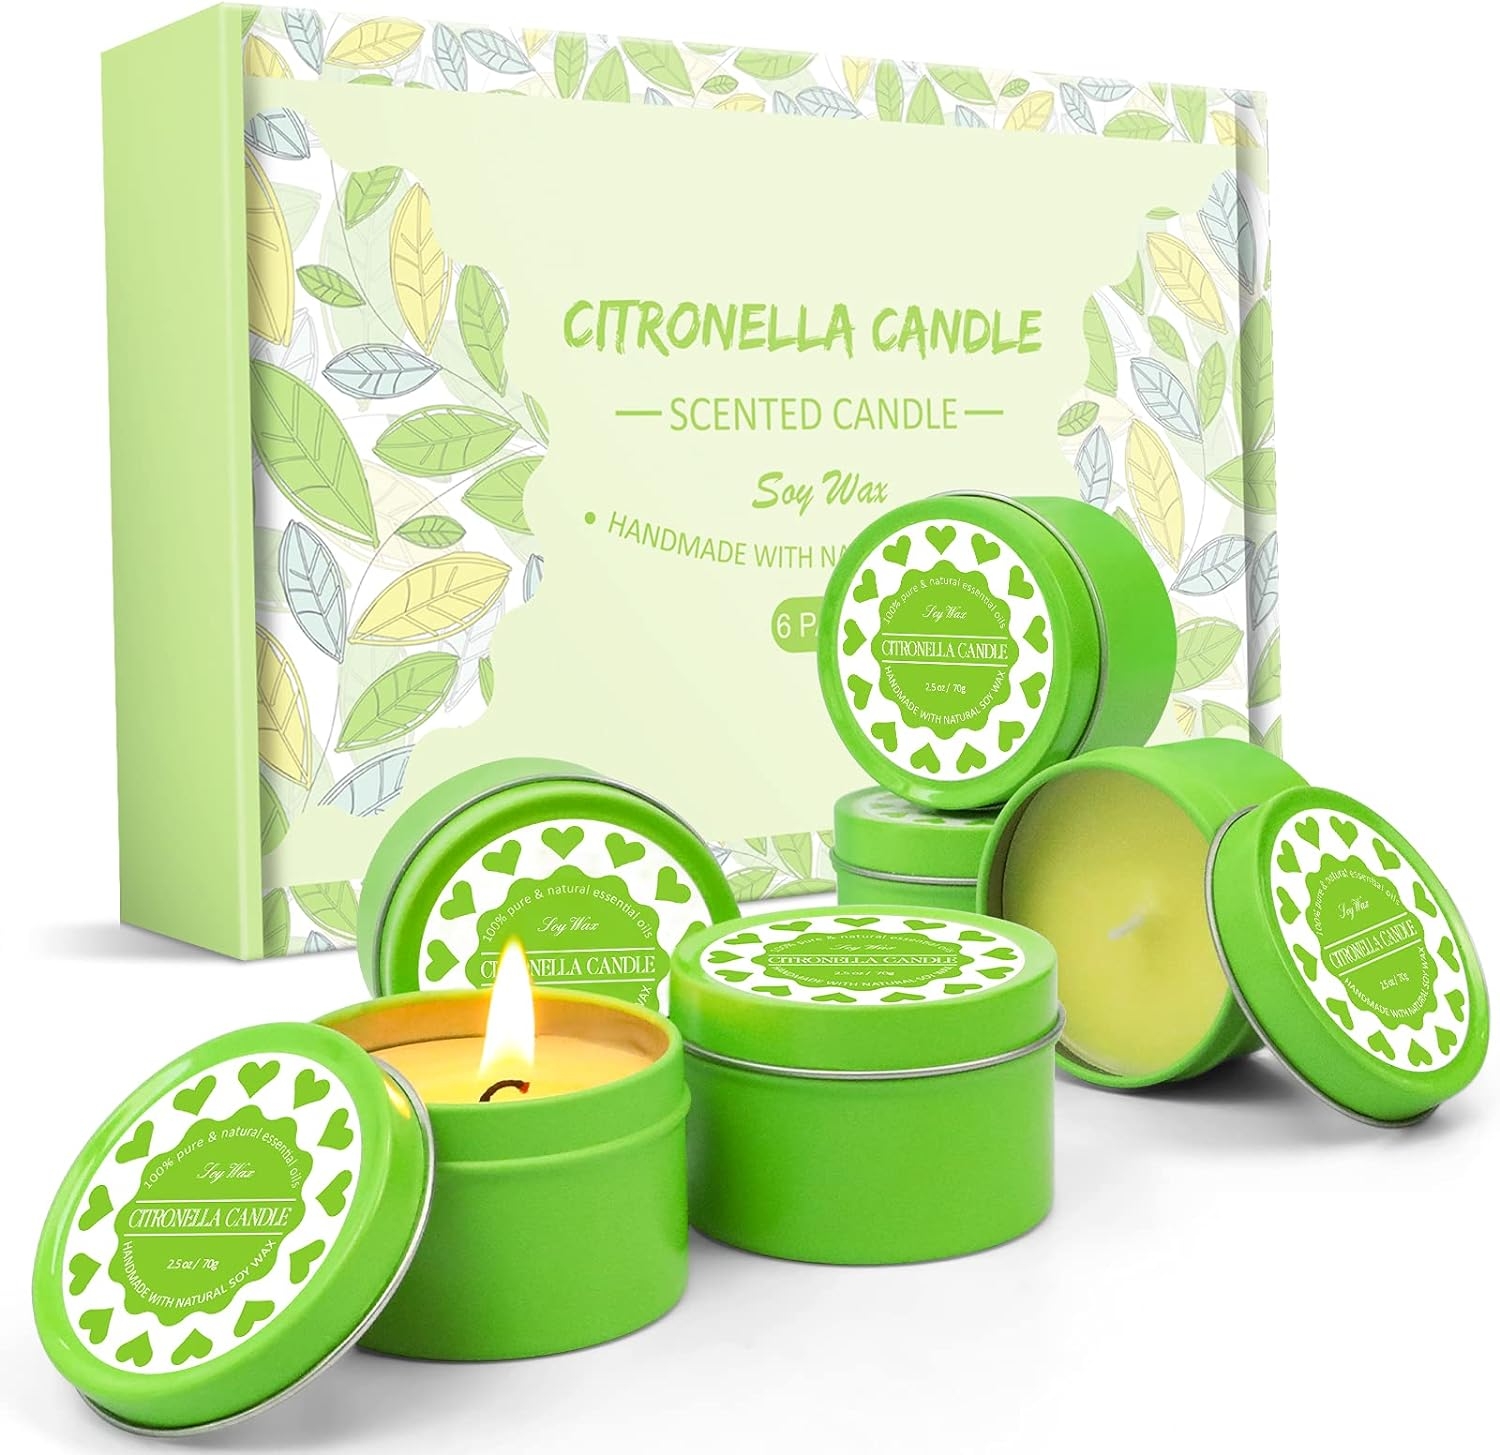 STRN Citronella Candles Outdoor, Scented Candles Lemongrass, Soy Wax Candles, Citronella Oil Candles, Summer Aromatherapy Candles for Indoor/Outdoor Use (6 Pack)